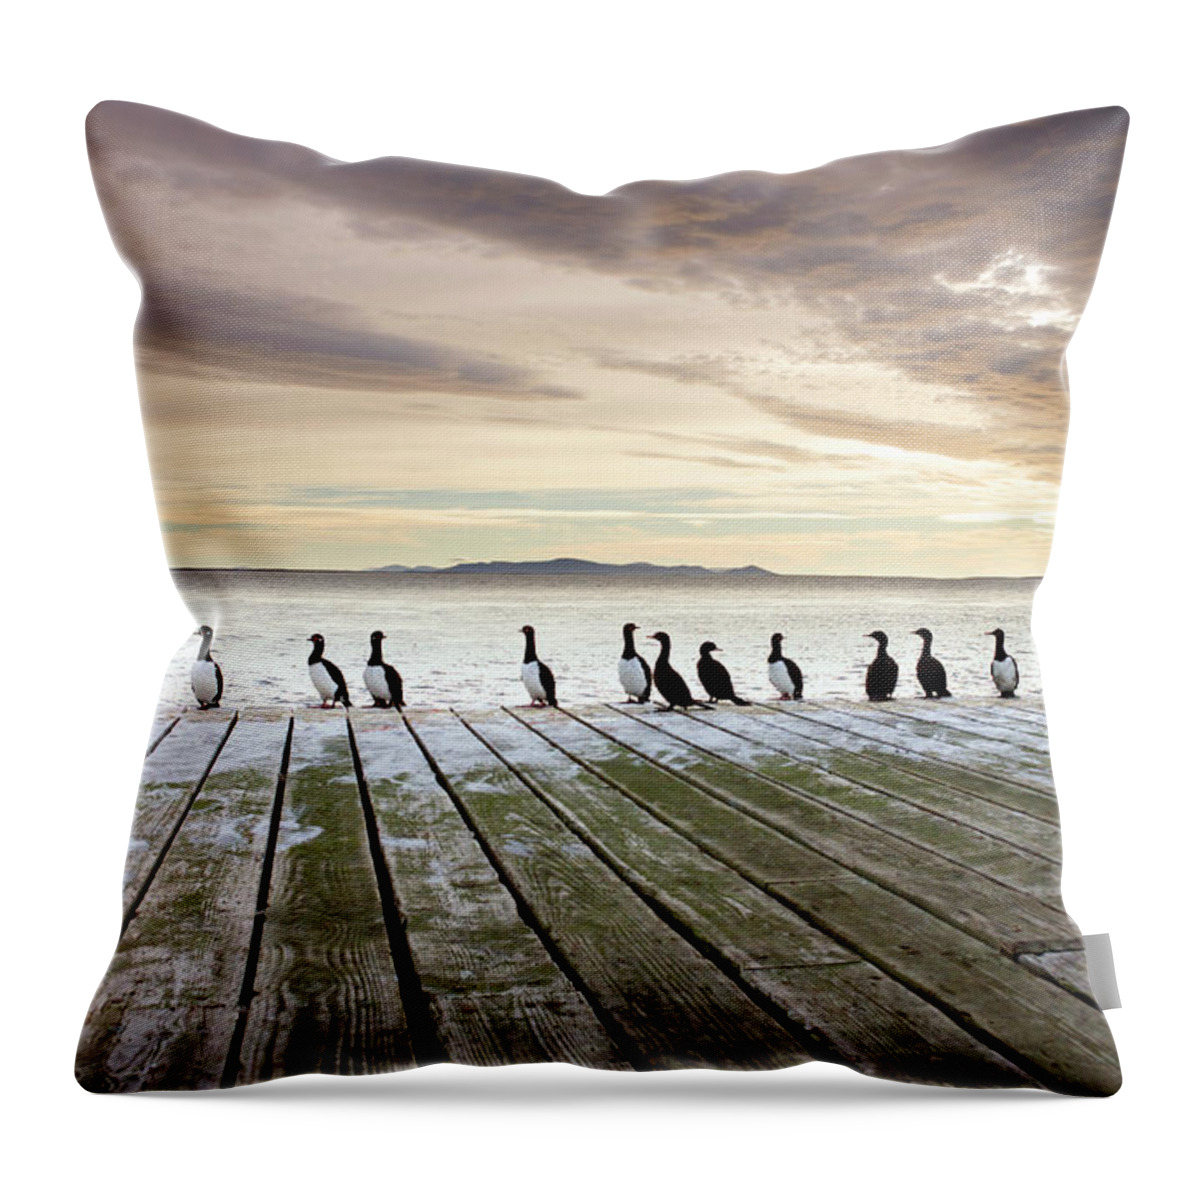 In A Row Throw Pillow featuring the photograph Rock Shags Phalacrocorax Magellanicus by Steve Allen